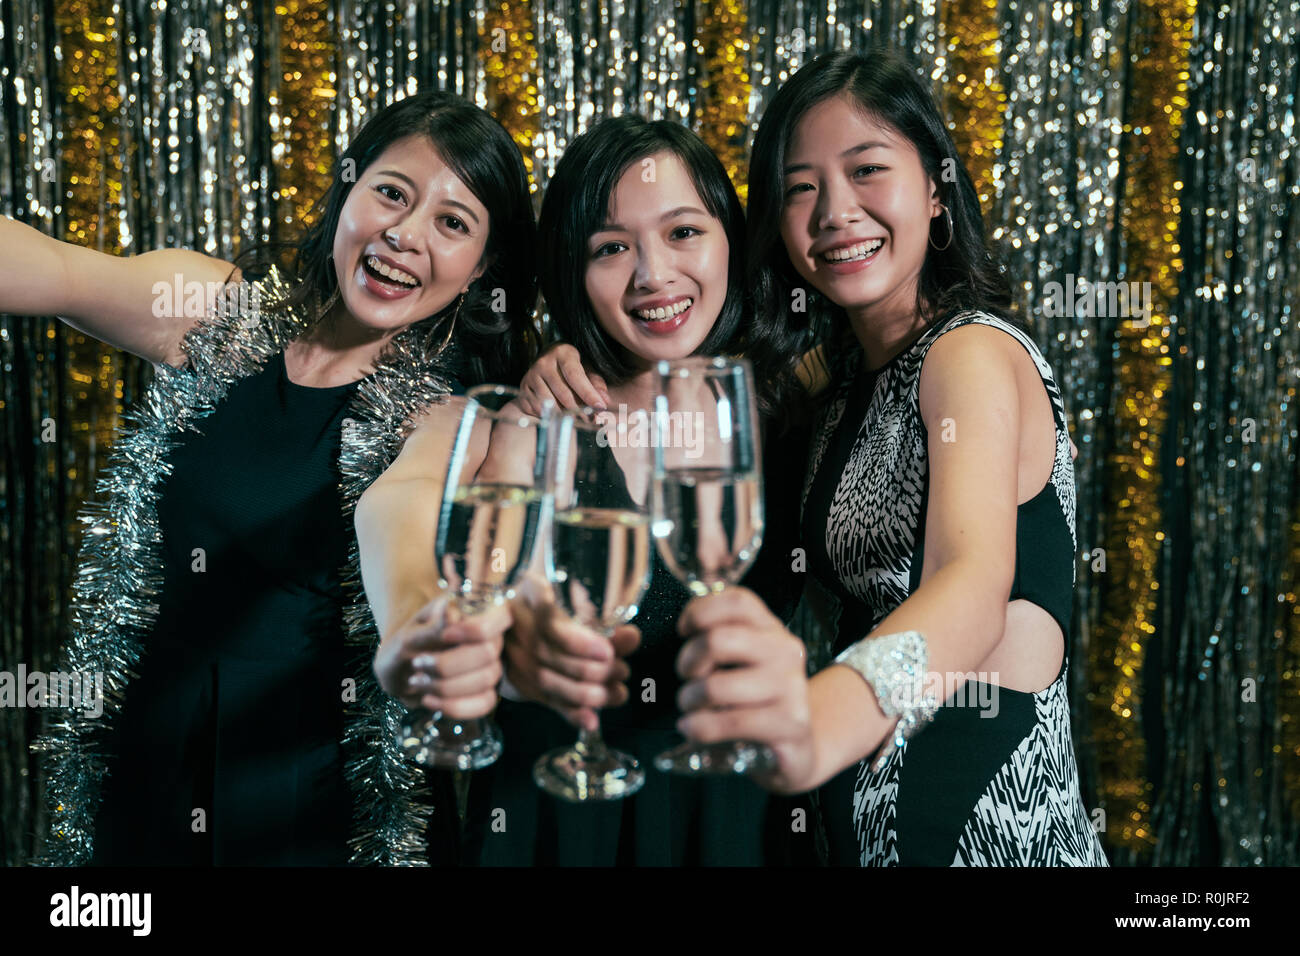 attractive women with fashion clothes having fun in nightclub. young ladies holding alcohol celebrating in club. girls night out cheer champagne to ca Stock Photo